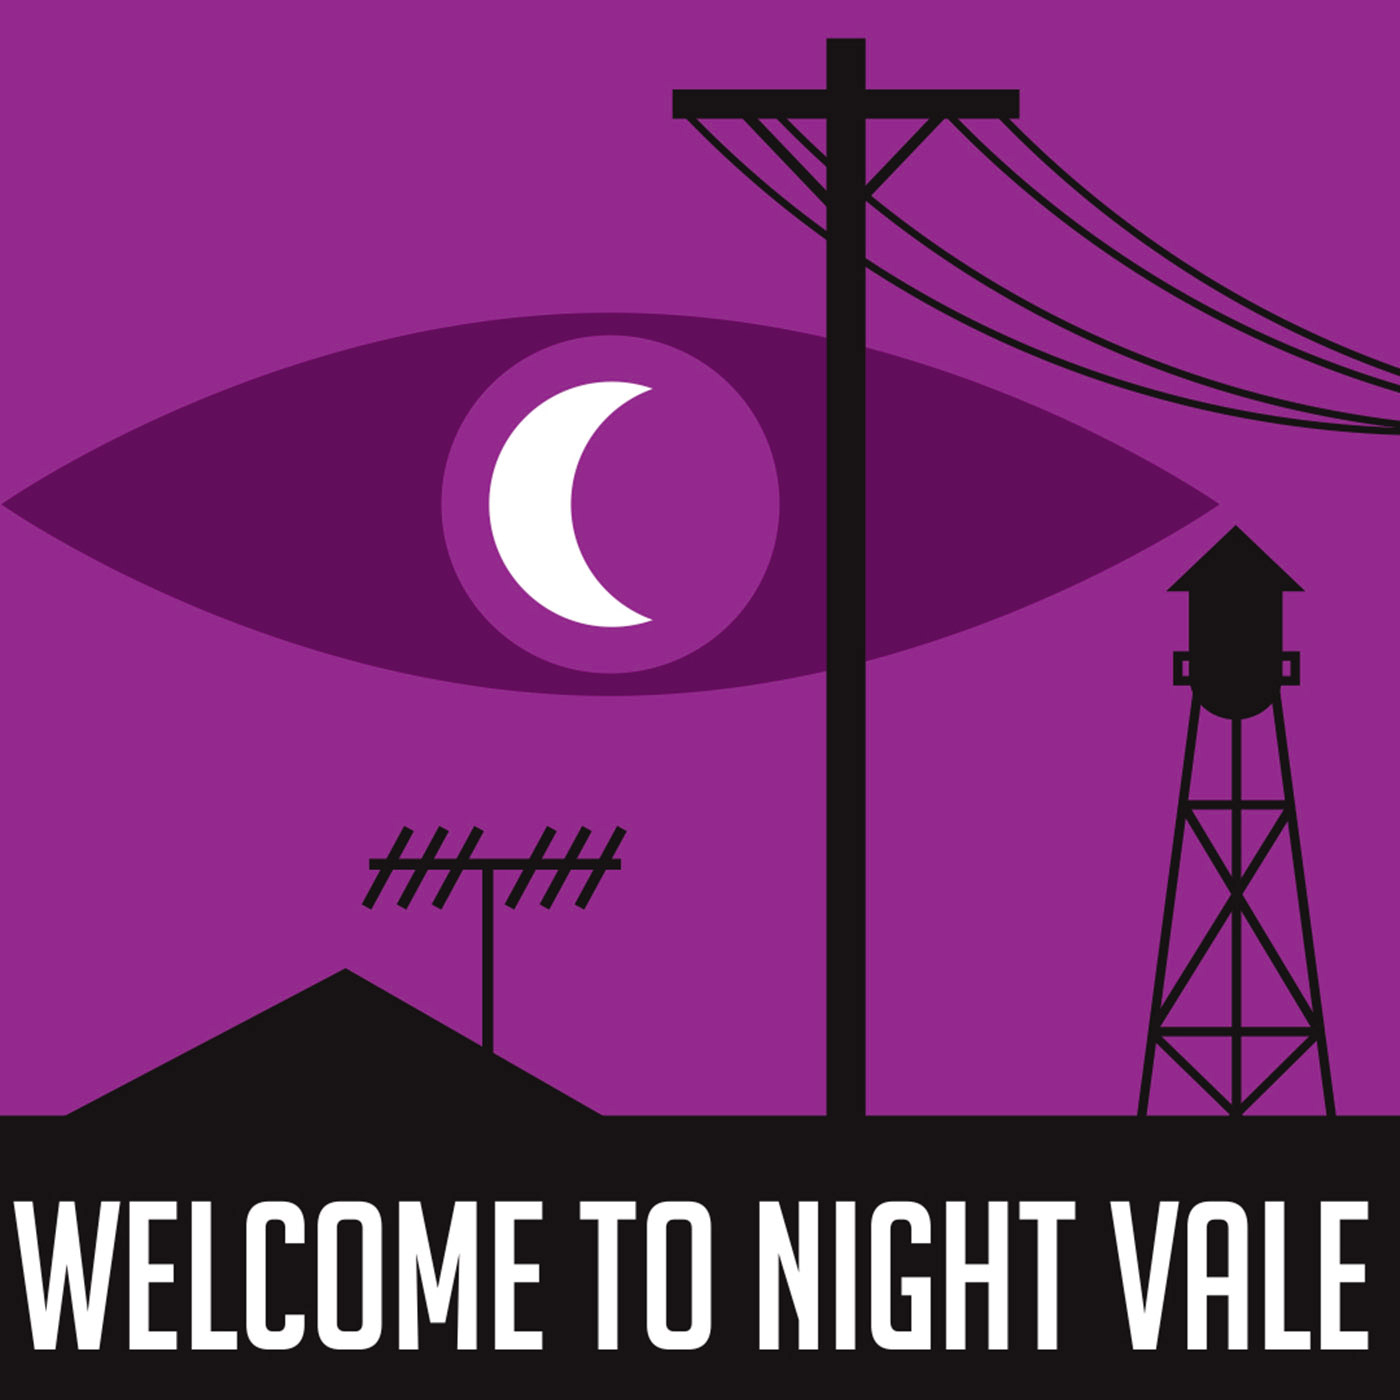 Welcome to San Francisco, “Welcome to Night Vale”